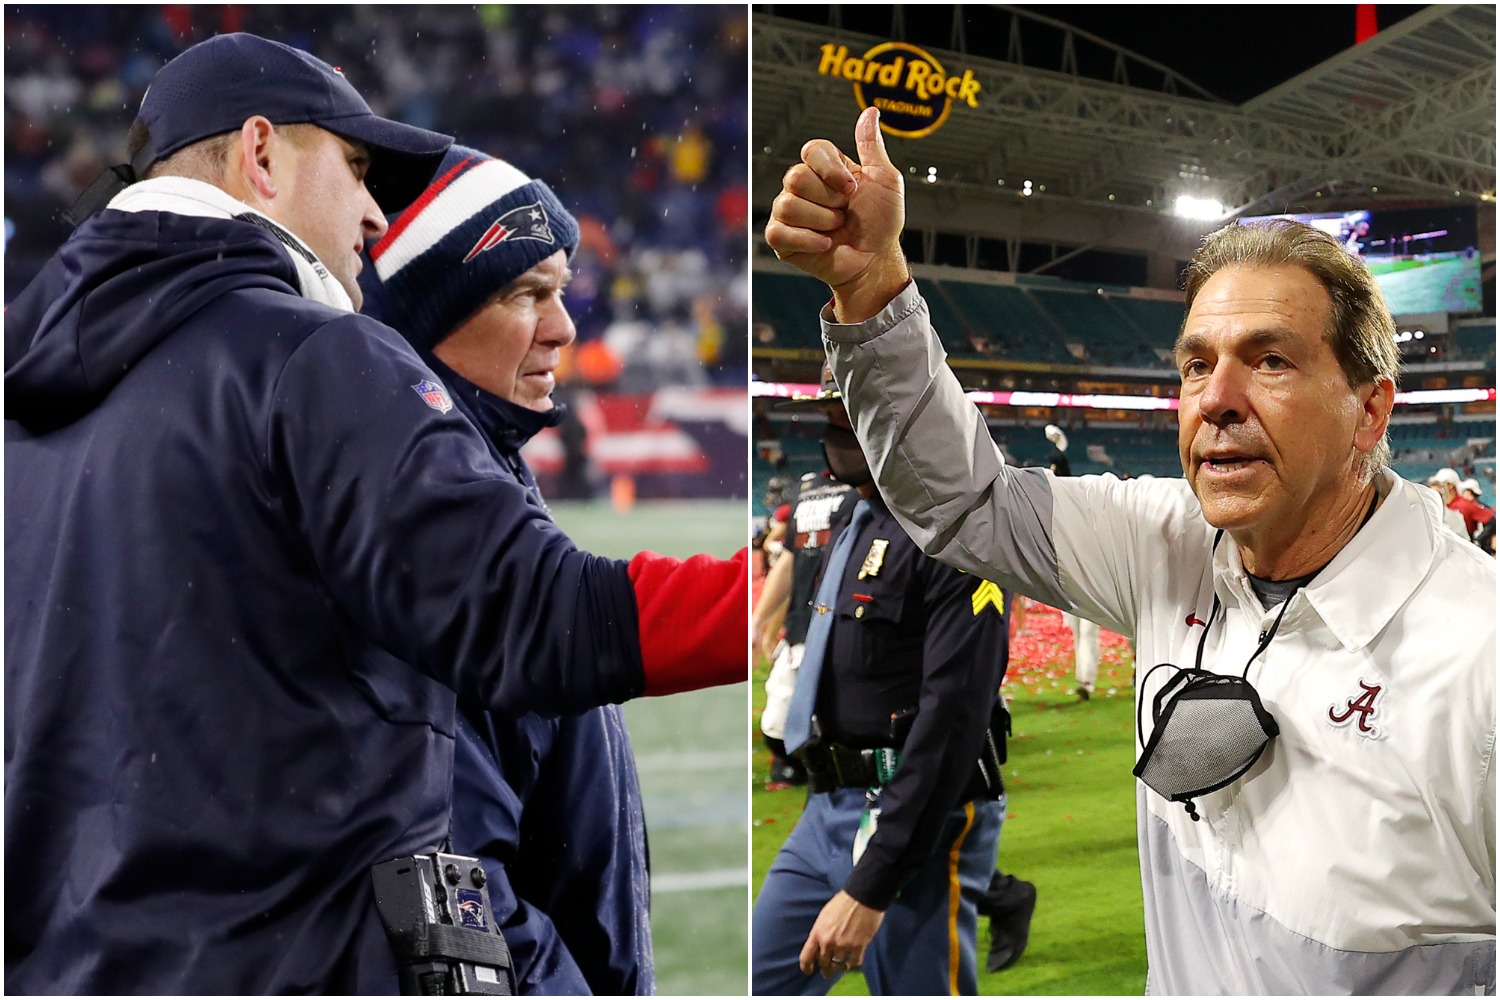 Joe Judge speaks to New England Patriots head coach Bill Belichick during a game as Alabama Crimson Tide coach Nick Saban gives a thumbs up after winning his most recent national championship.